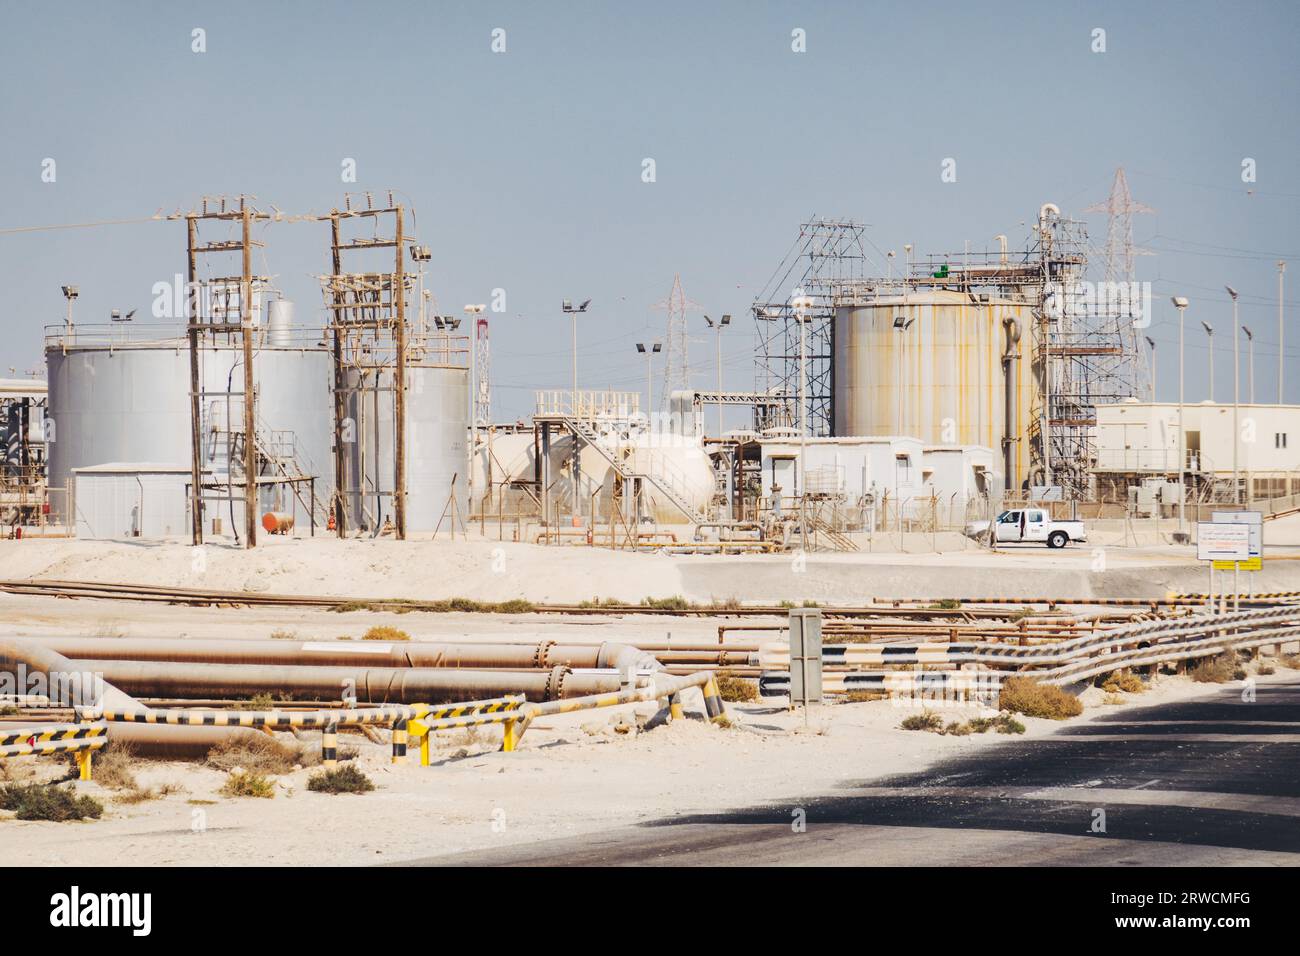 natural gas pipelines, storage tanks and other infrastructure in the desert in Bahrain Stock Photo